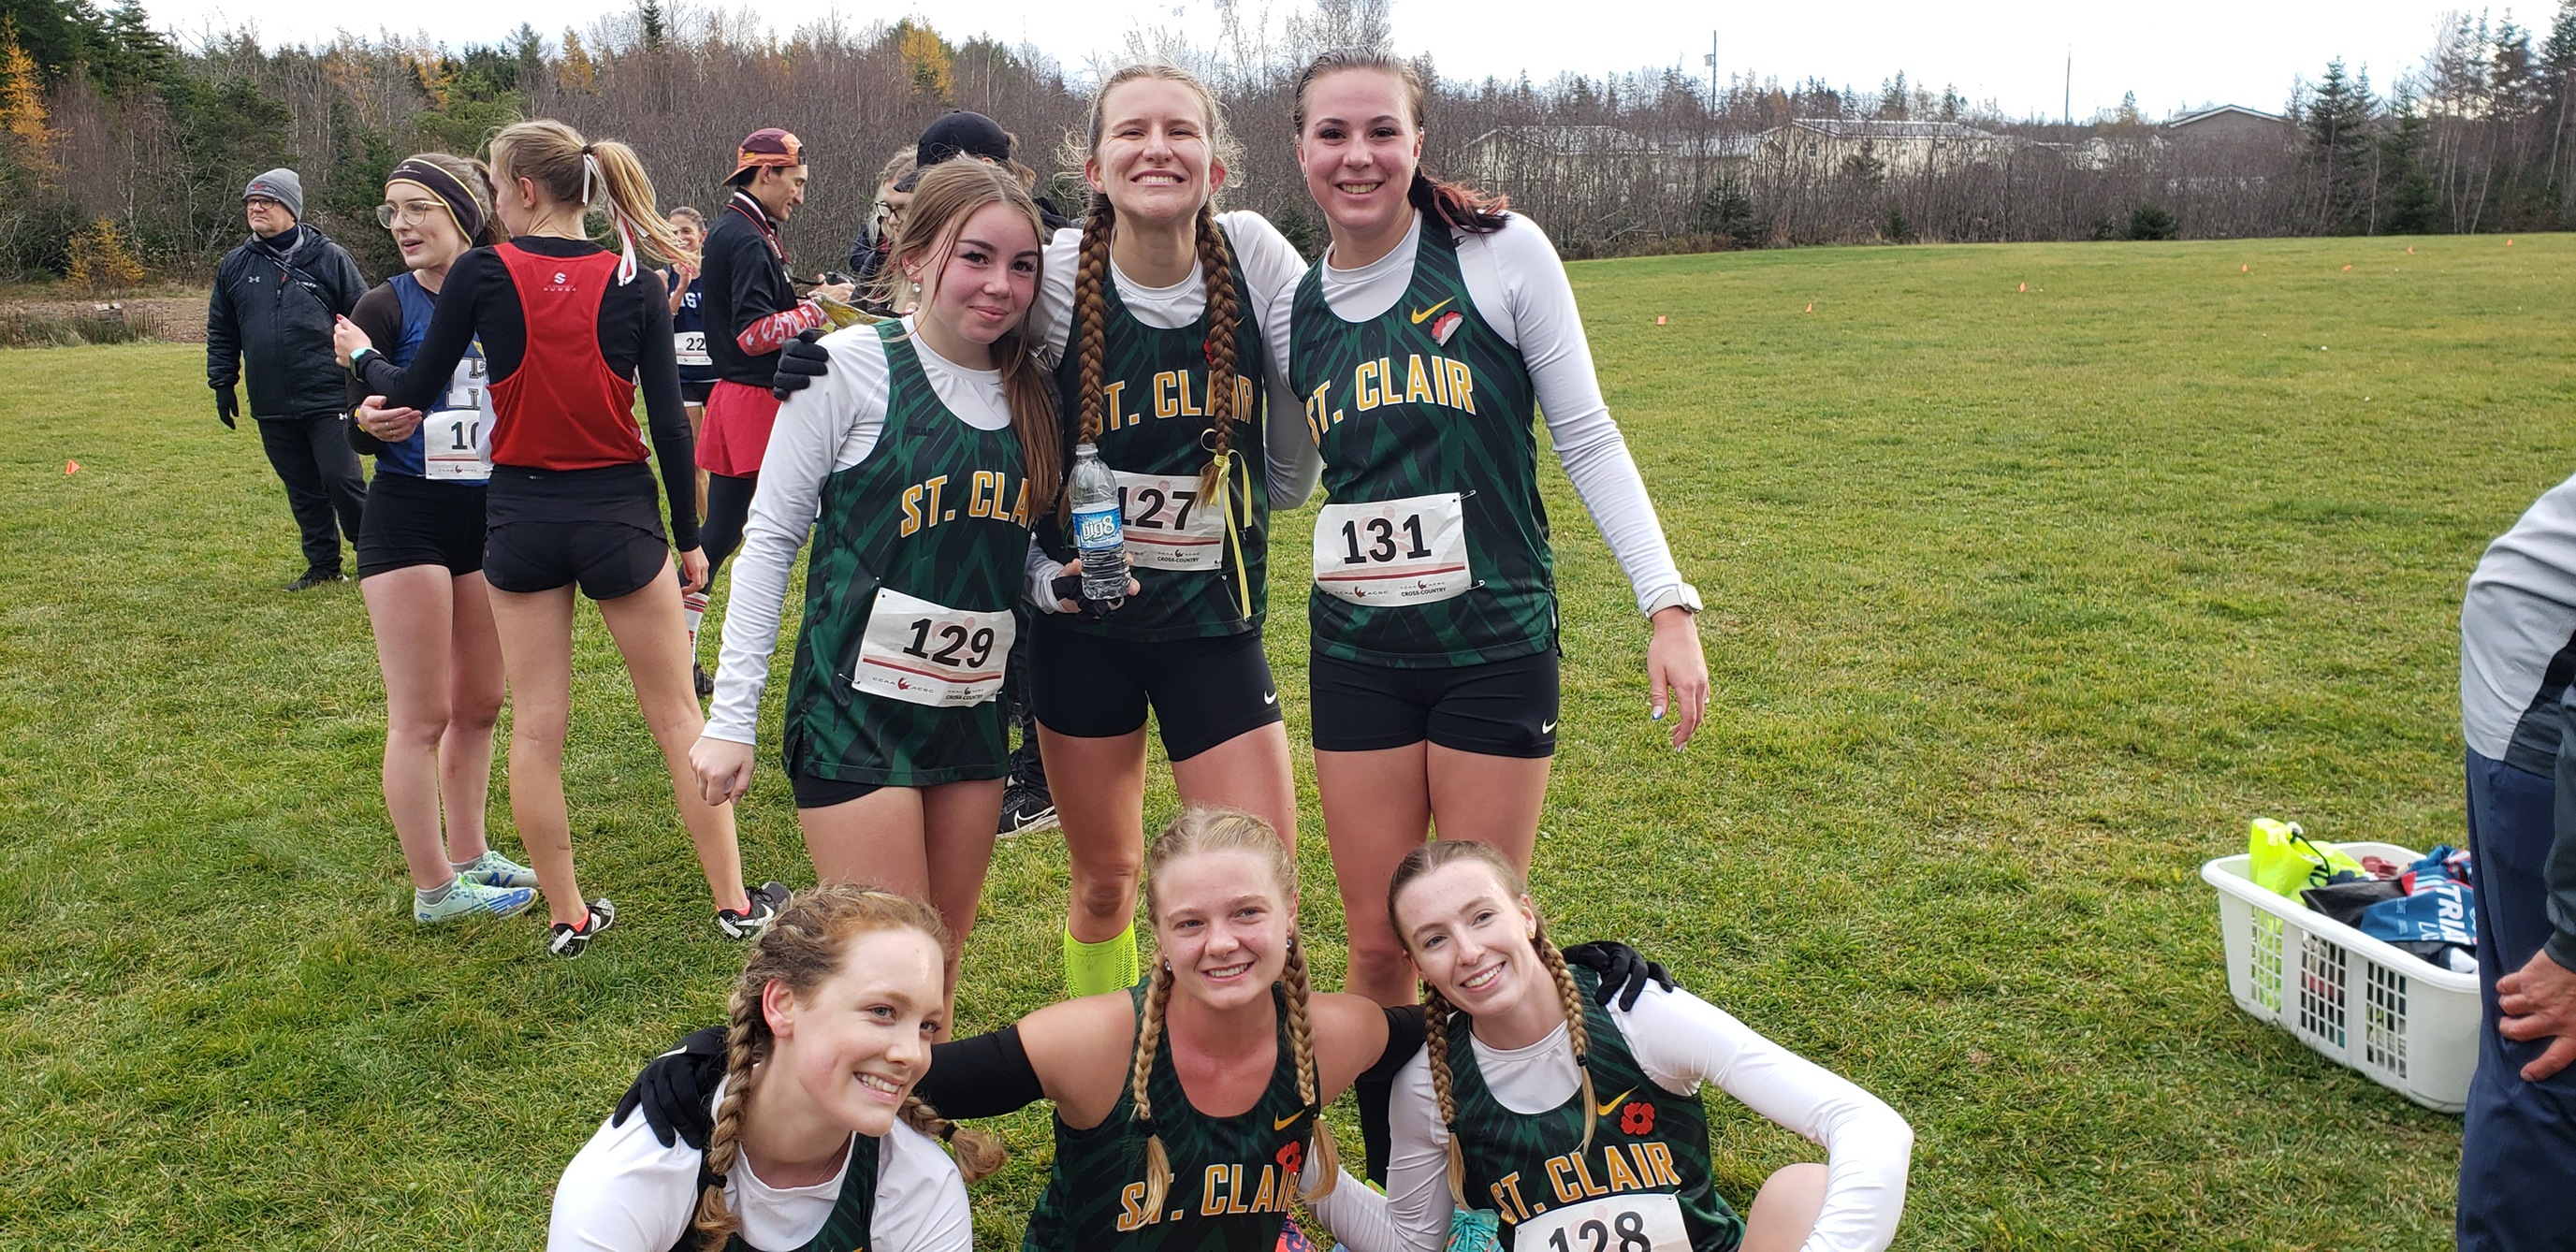 Women’s Cross-Country Finish 8th at Nationals